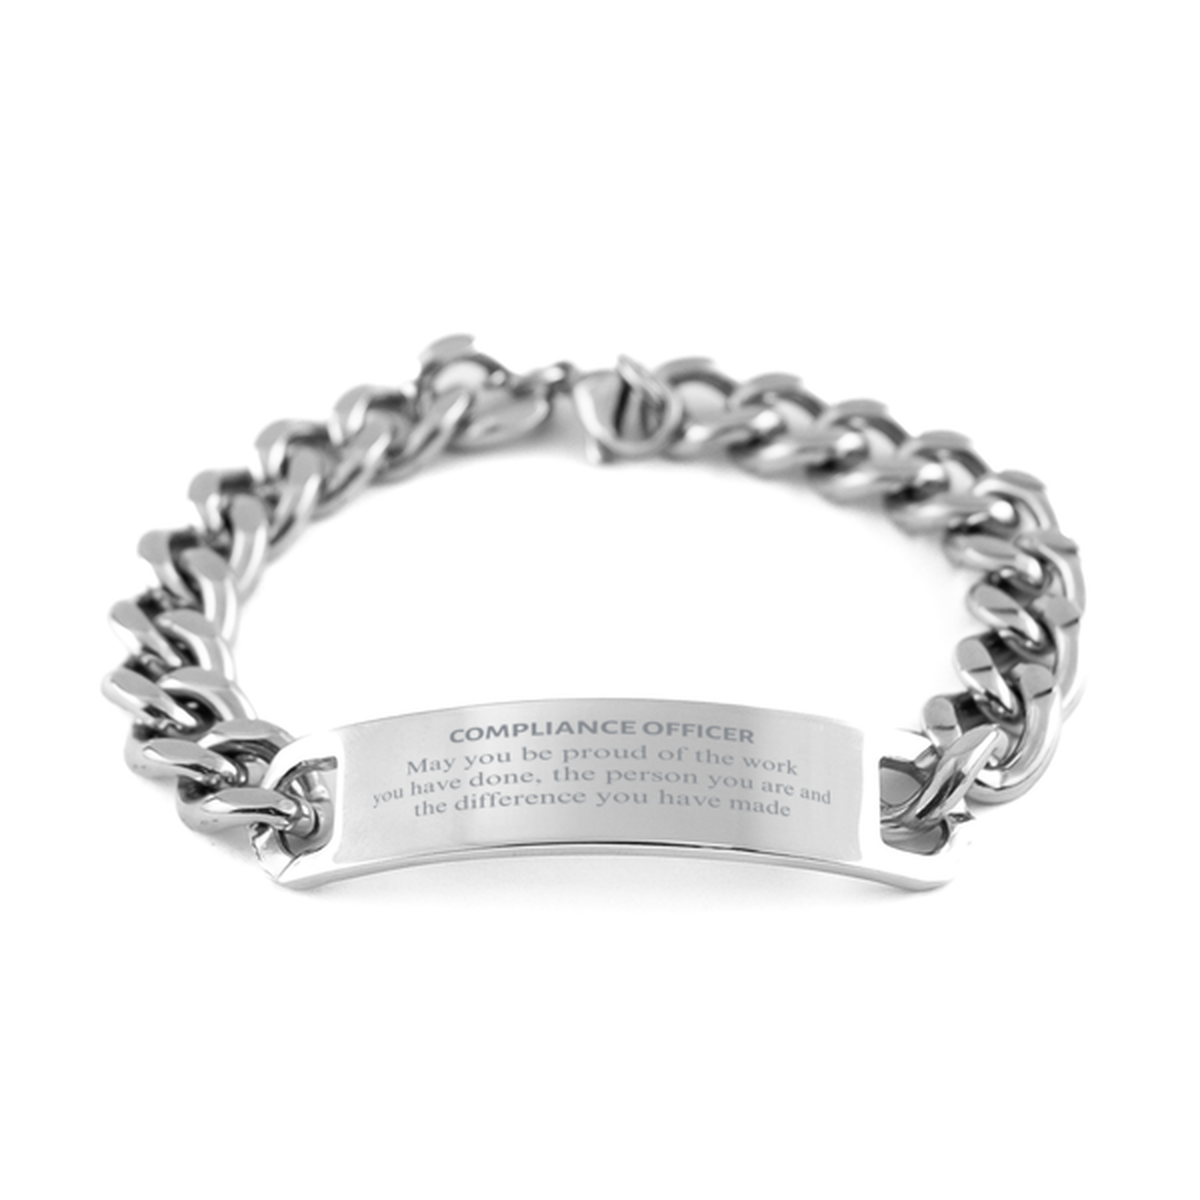 Compliance Officer May you be proud of the work you have done, Retirement Compliance Officer Cuban Chain Stainless Steel Bracelet for Colleague Appreciation Gifts Amazing for Compliance Officer